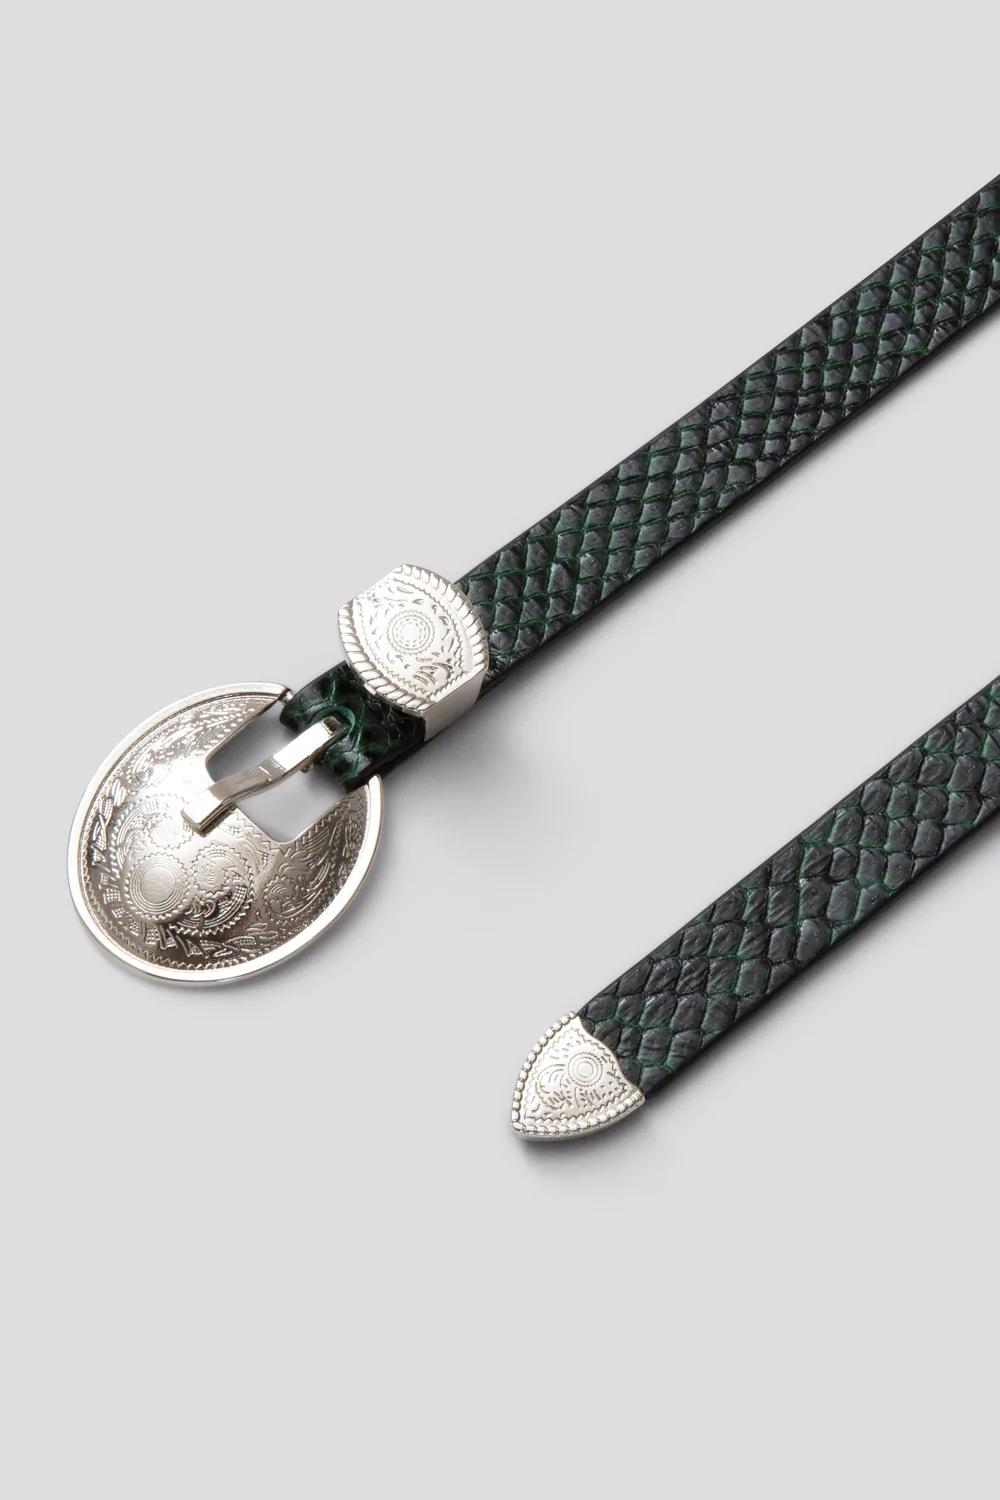 Product Image for Western Belt, Green Croc